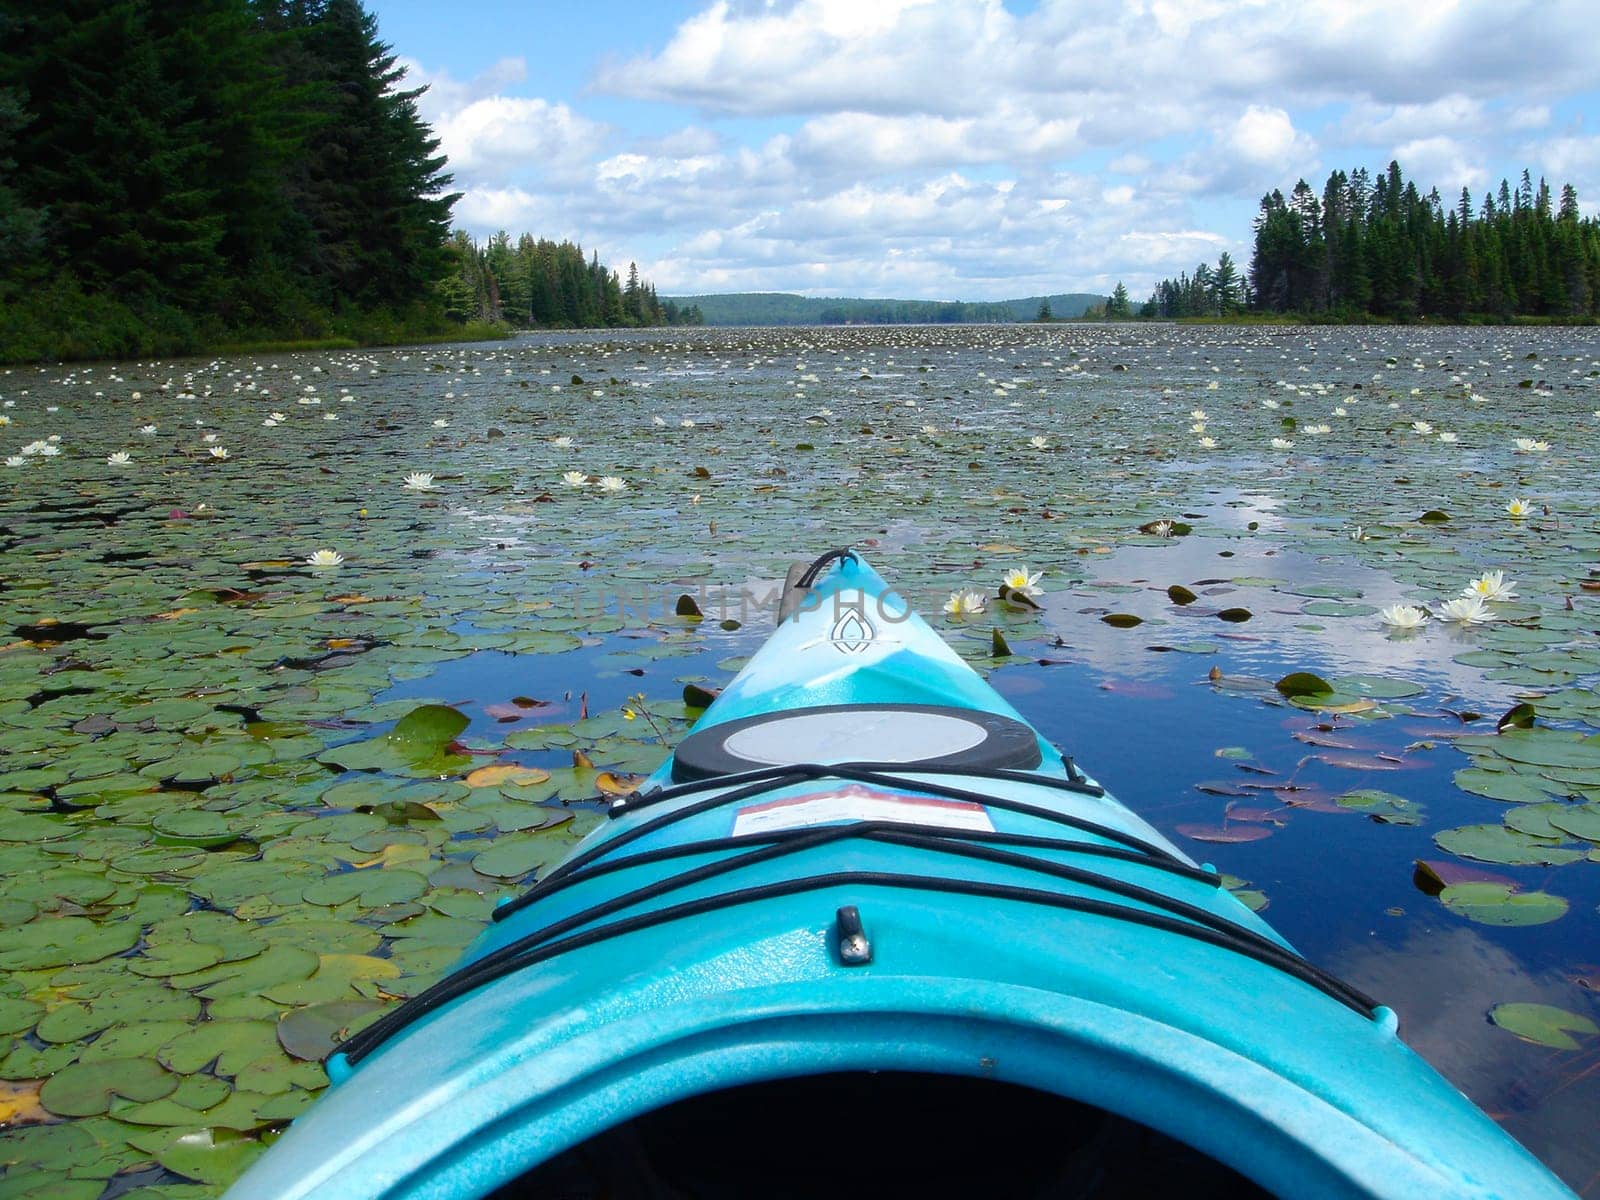 Water Lily lake from Kayak in Algonquin park, Canada